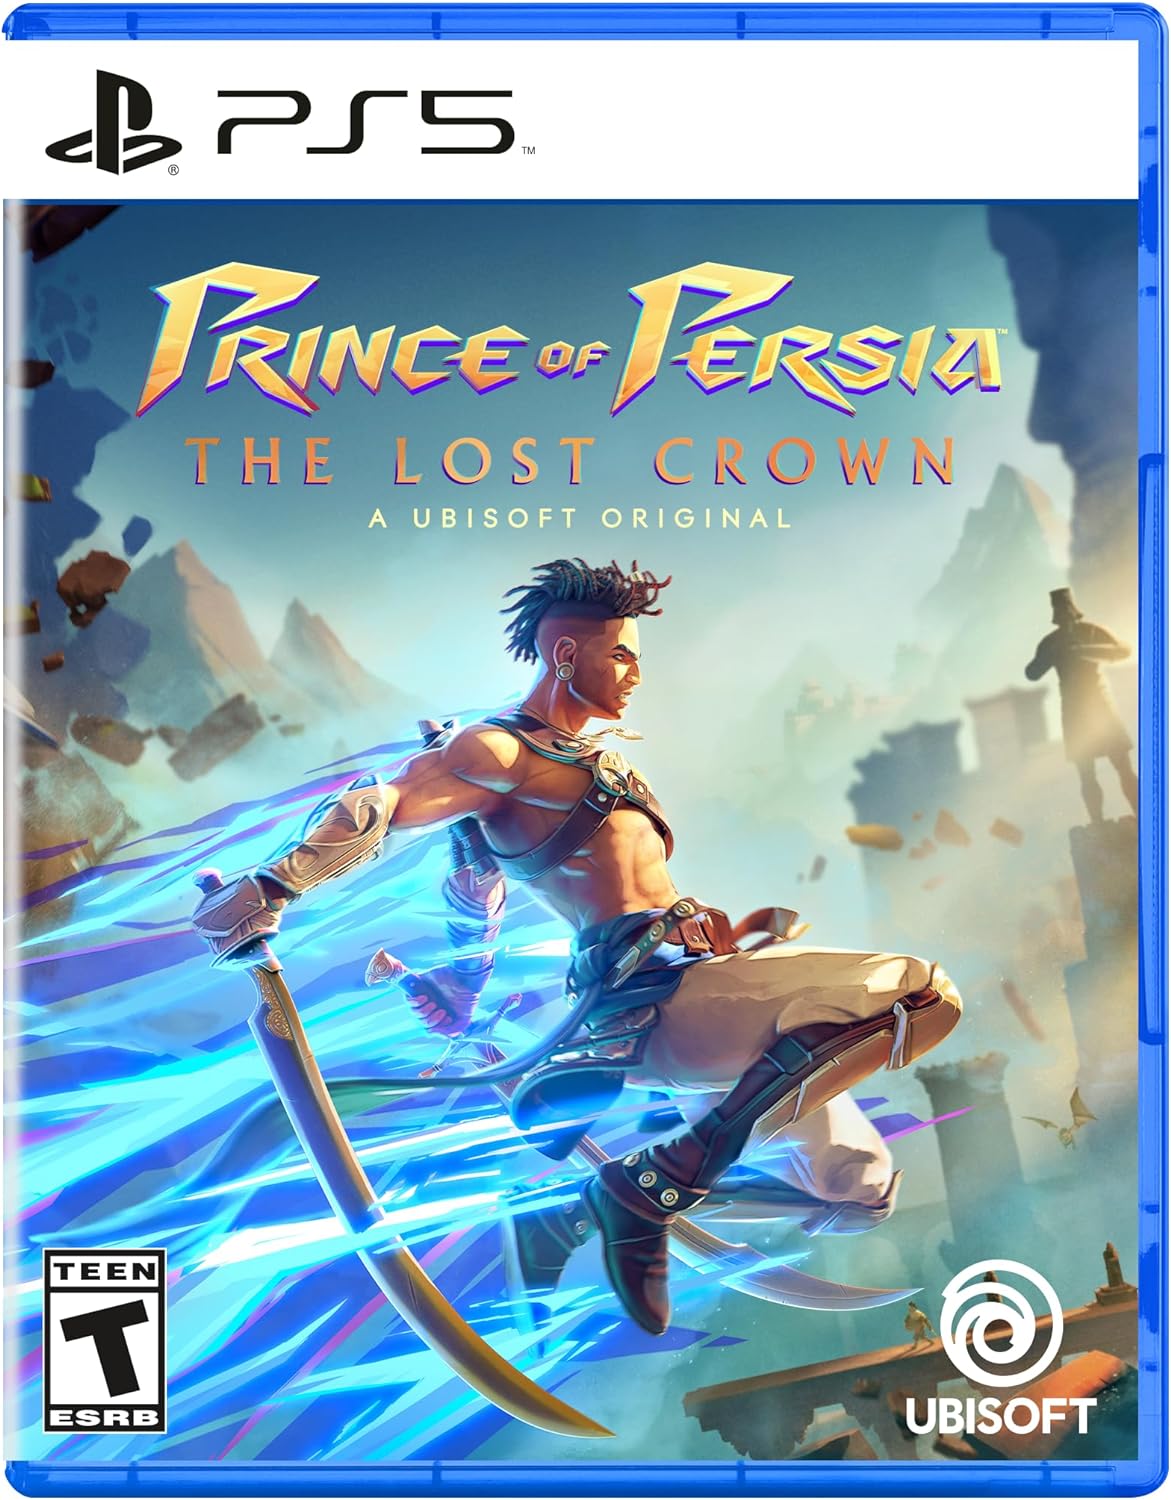 The Prince of Persia